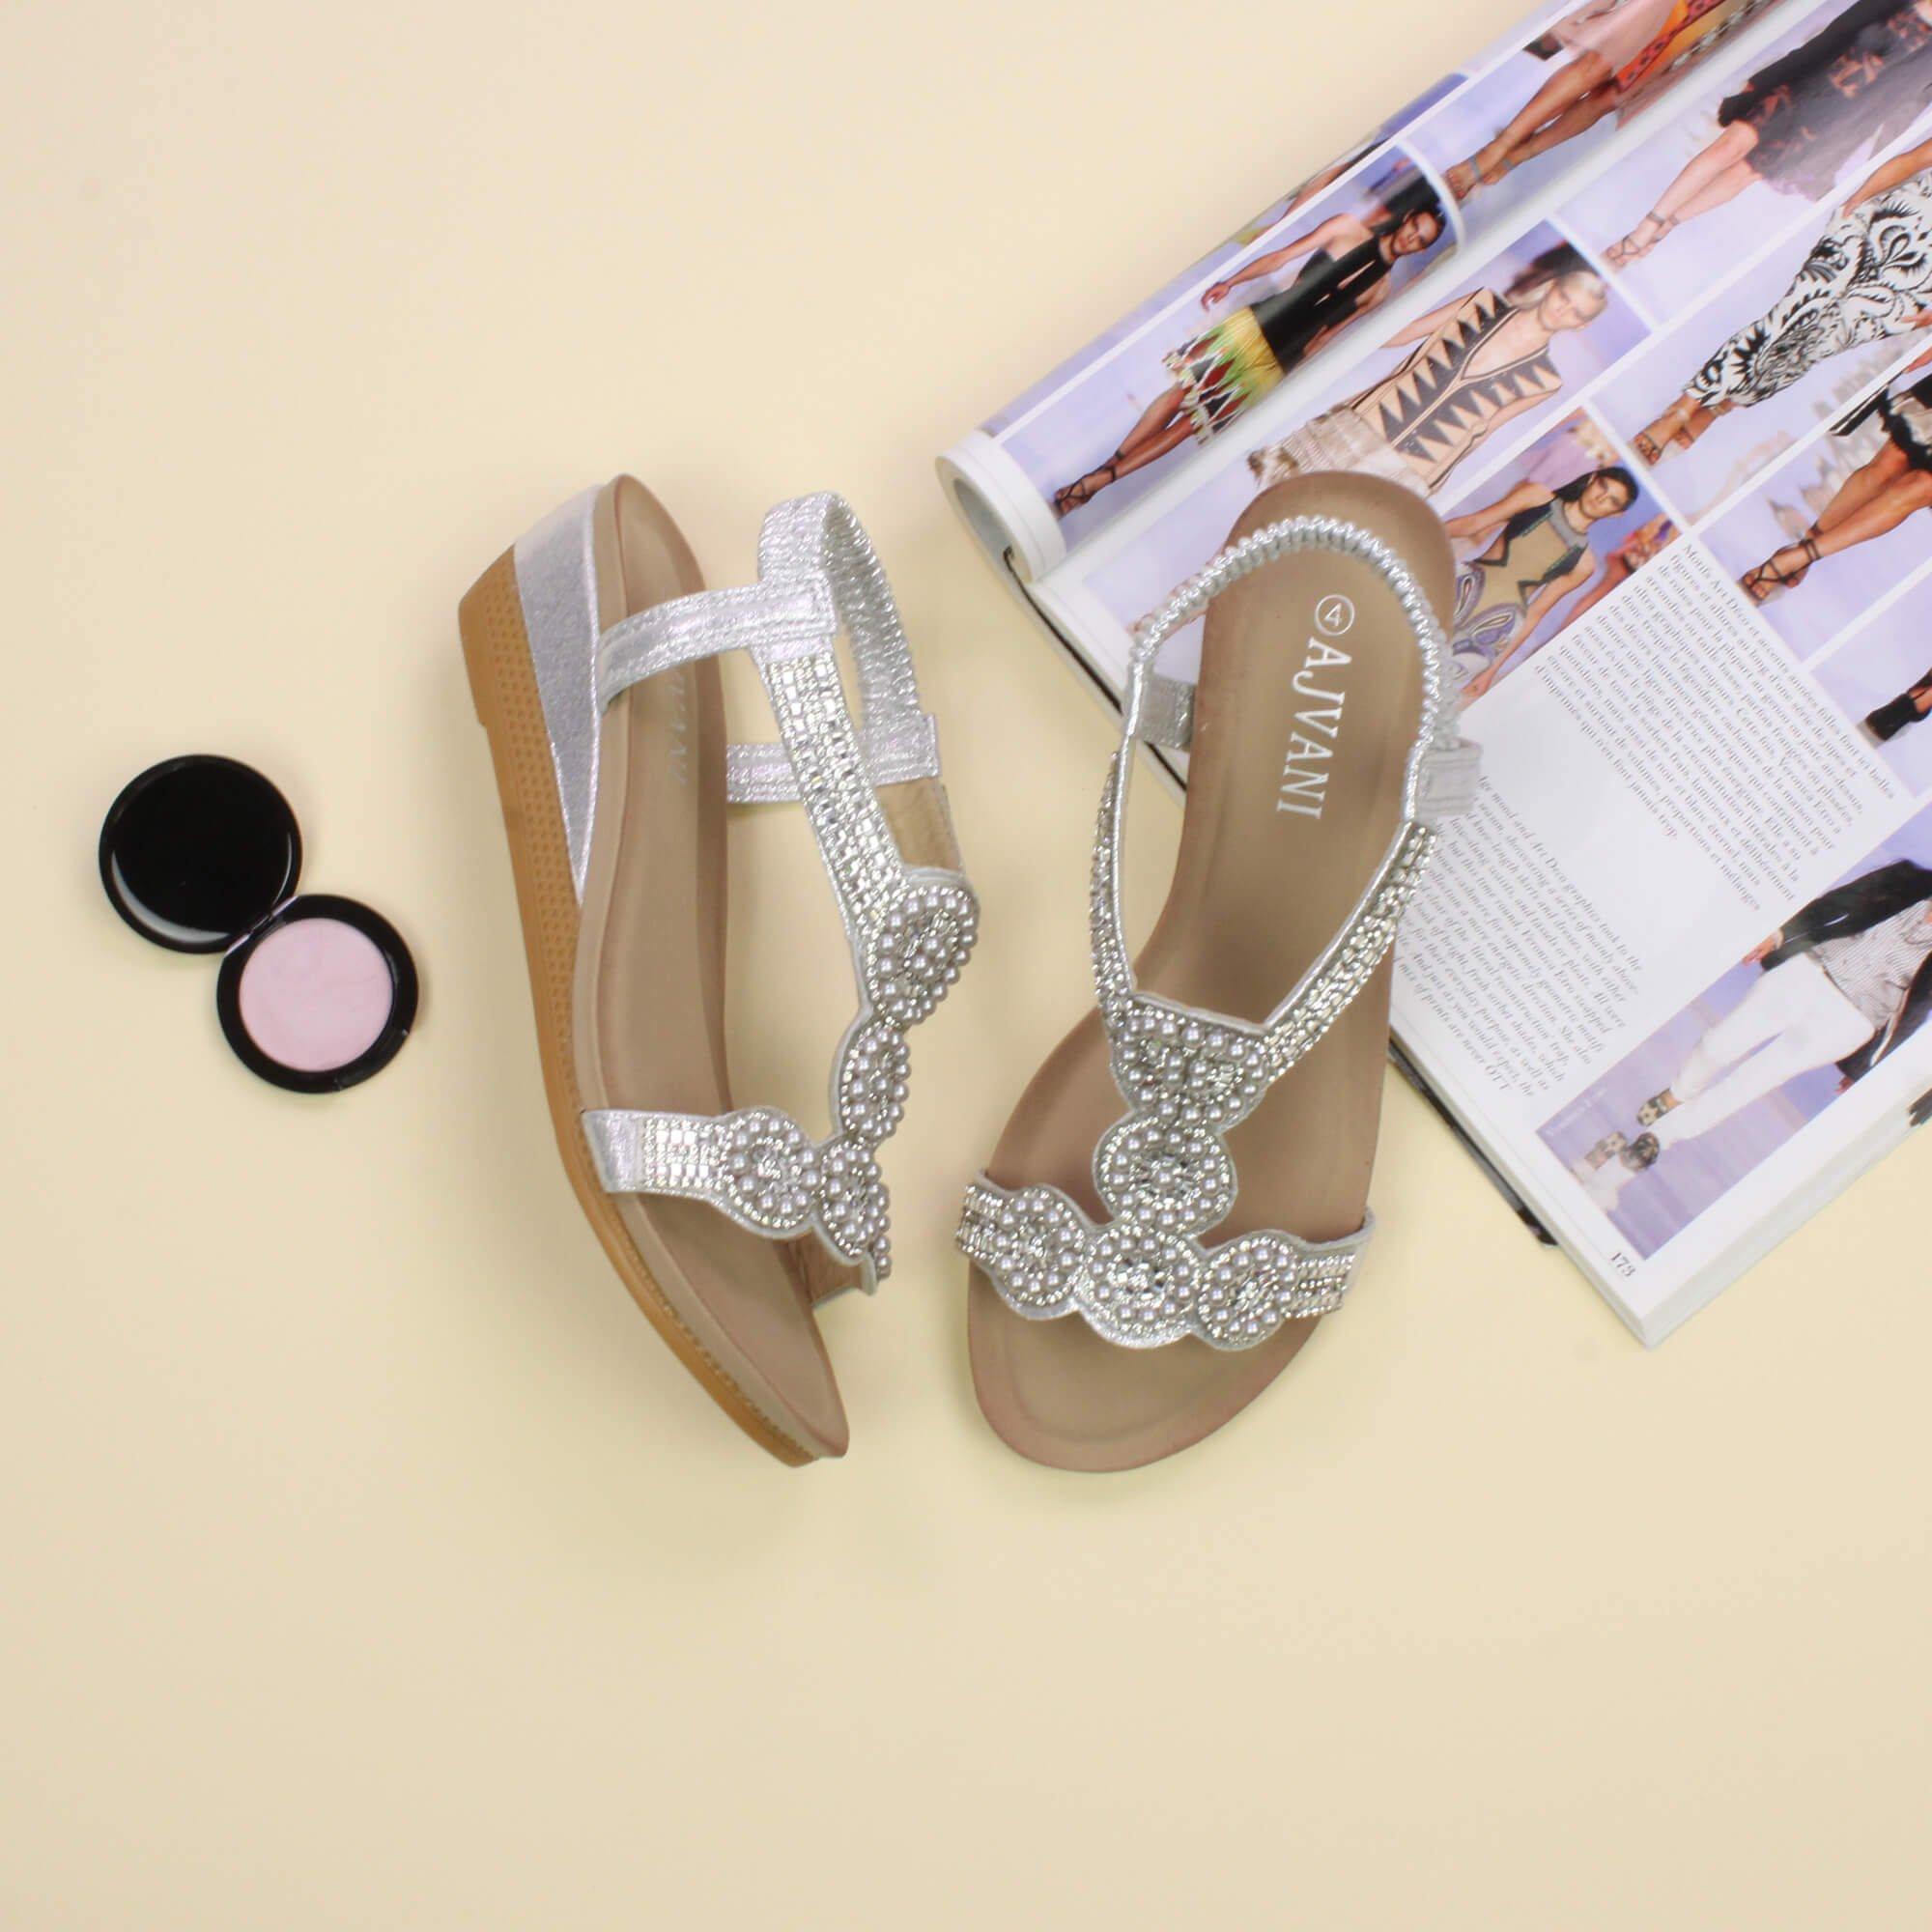 My Sister's Wedding - Don't let her see me yet | Fashion shoes sandals,  Womens sandals, Shoes flats sandals